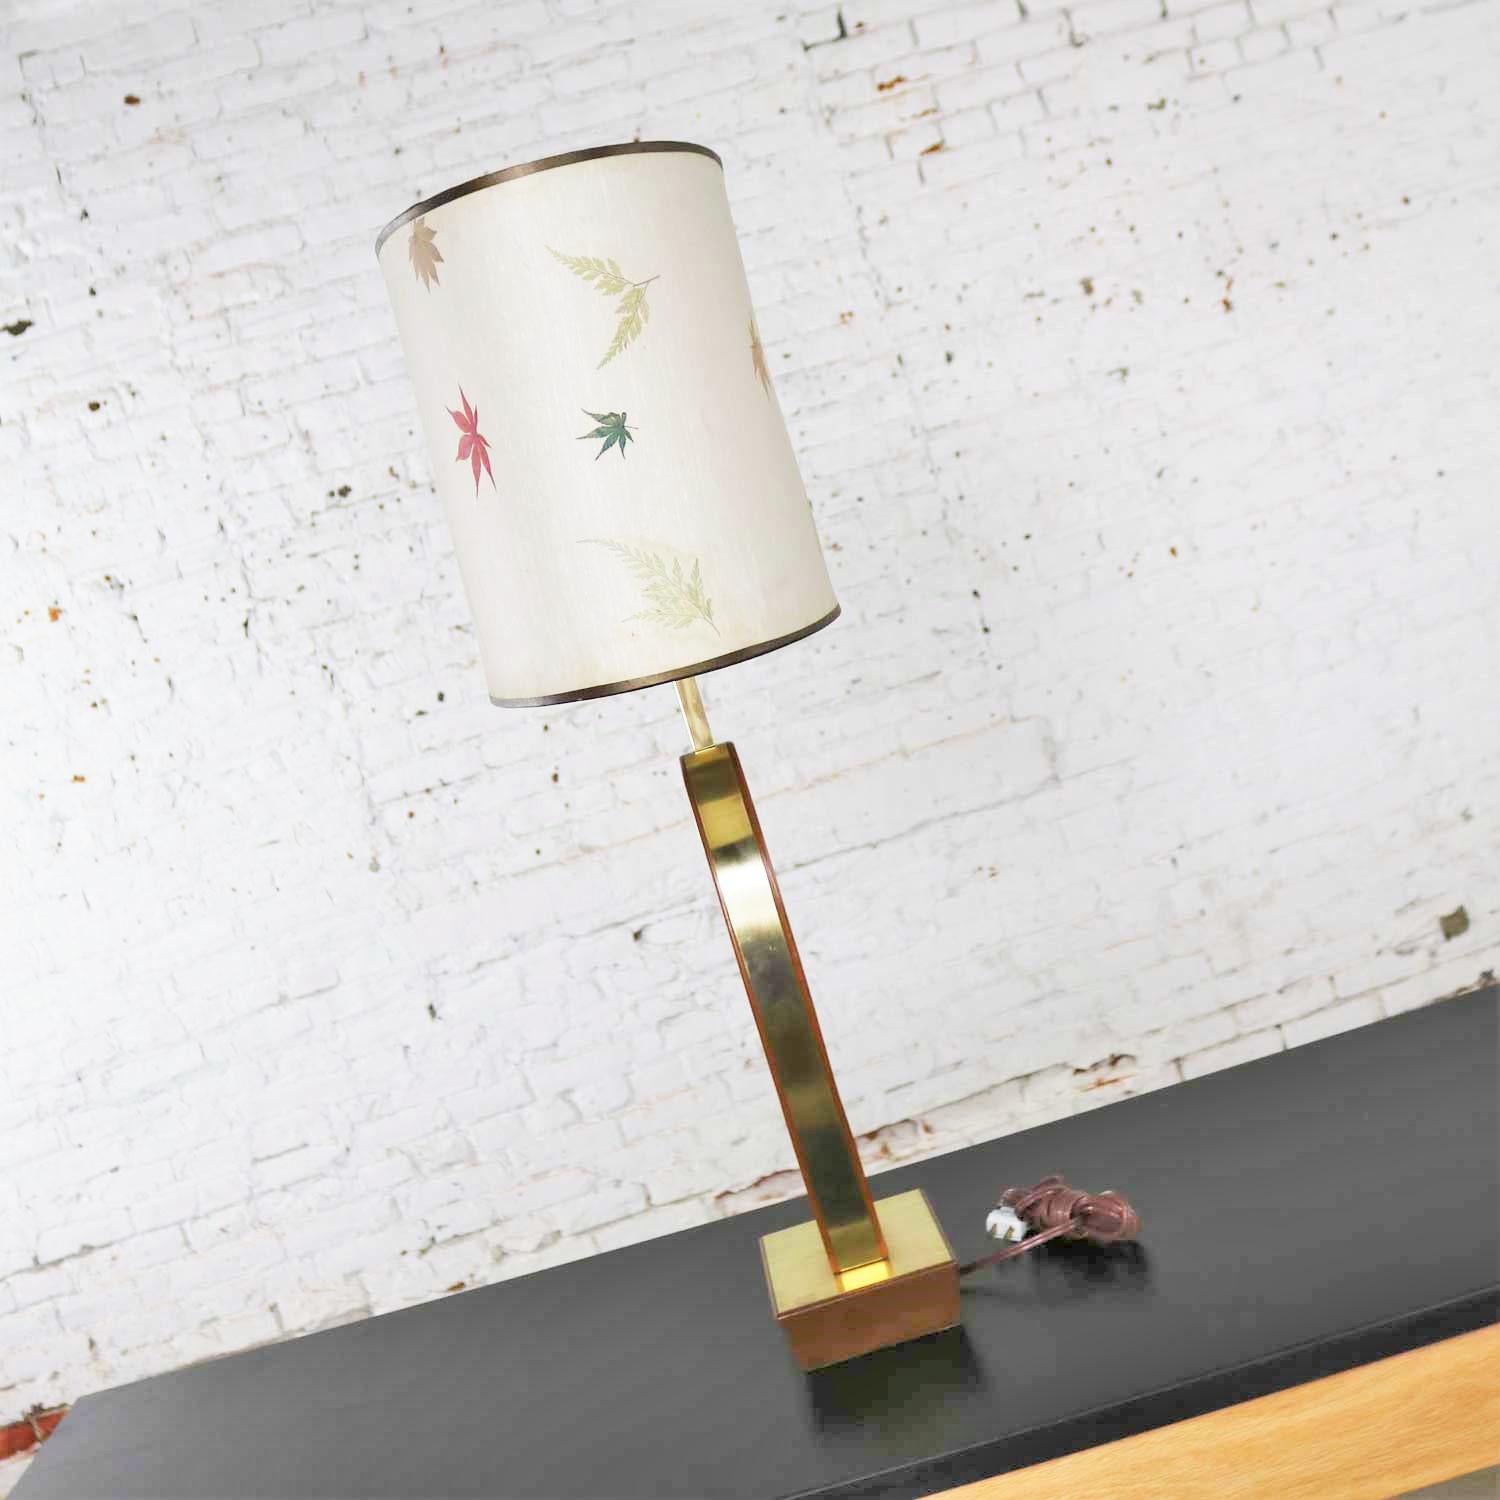 20th Century Mid-Century Modern Sculptural Biomorphic Walnut and Brass Table Lamp by Modeline For Sale